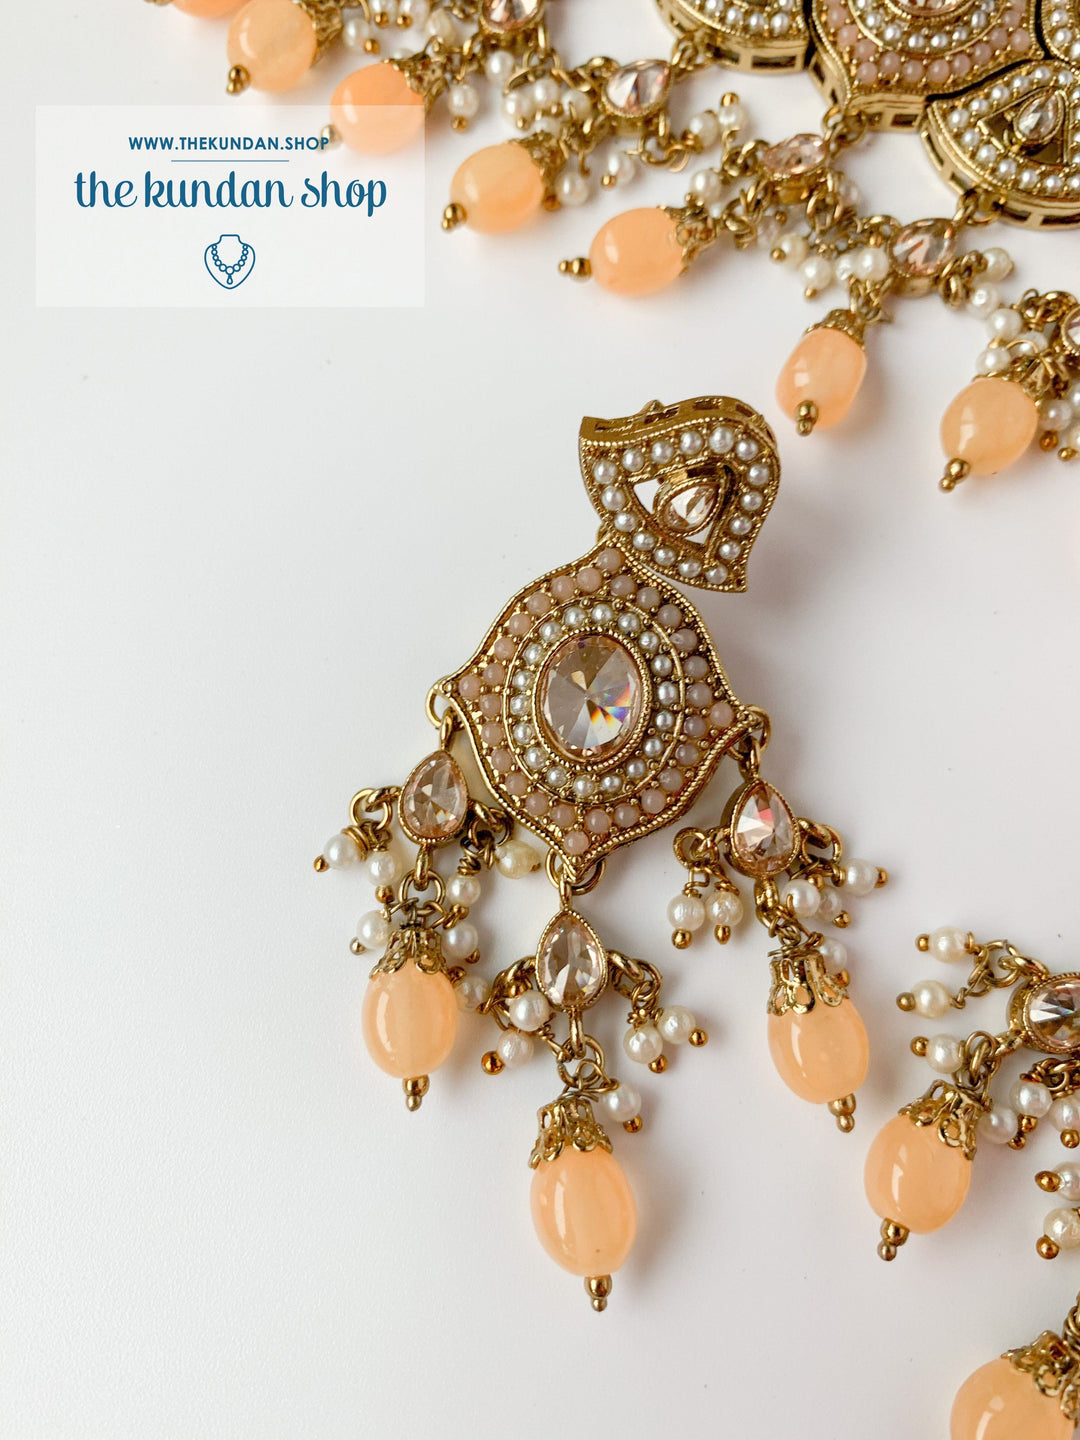 Entangled in Peach Necklace Sets THE KUNDAN SHOP 